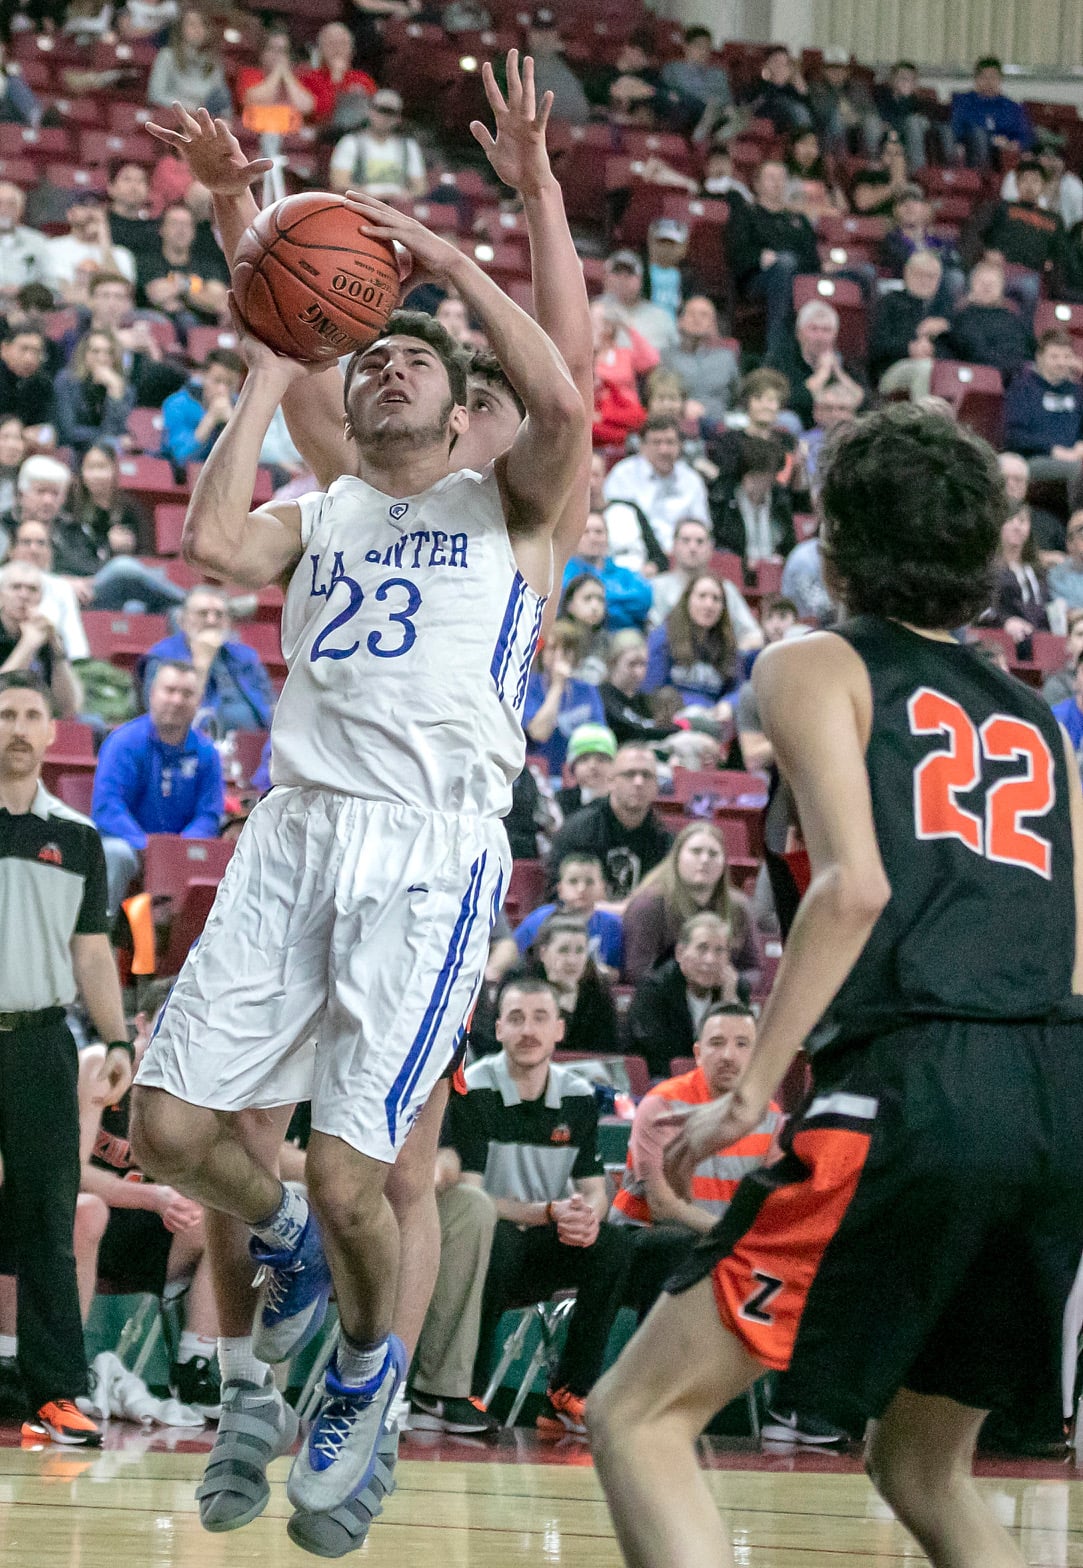 La Center's Hunter Ecklund (23), shoots Zillah's Kaden Magana (22), during the WIAA 1A boys state tournament on Friday, Mar. 1, 2019, at the Yakima Valley SunDome.